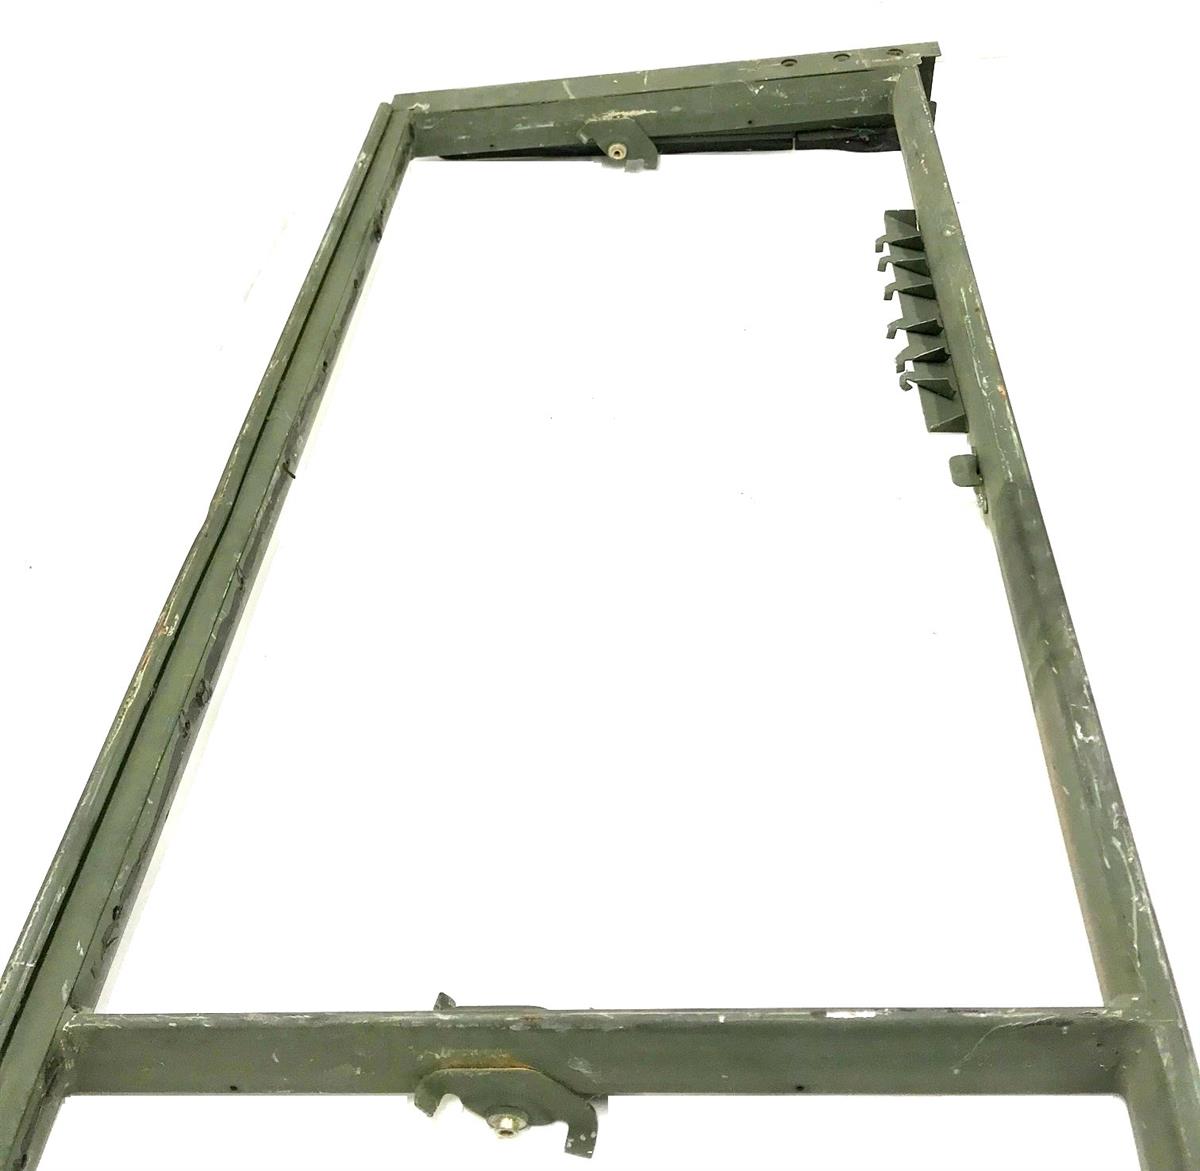 9M-878 | 9M-878  M939 Series 5 Ton Outer Windshield Frame  (6)(USED).jpg